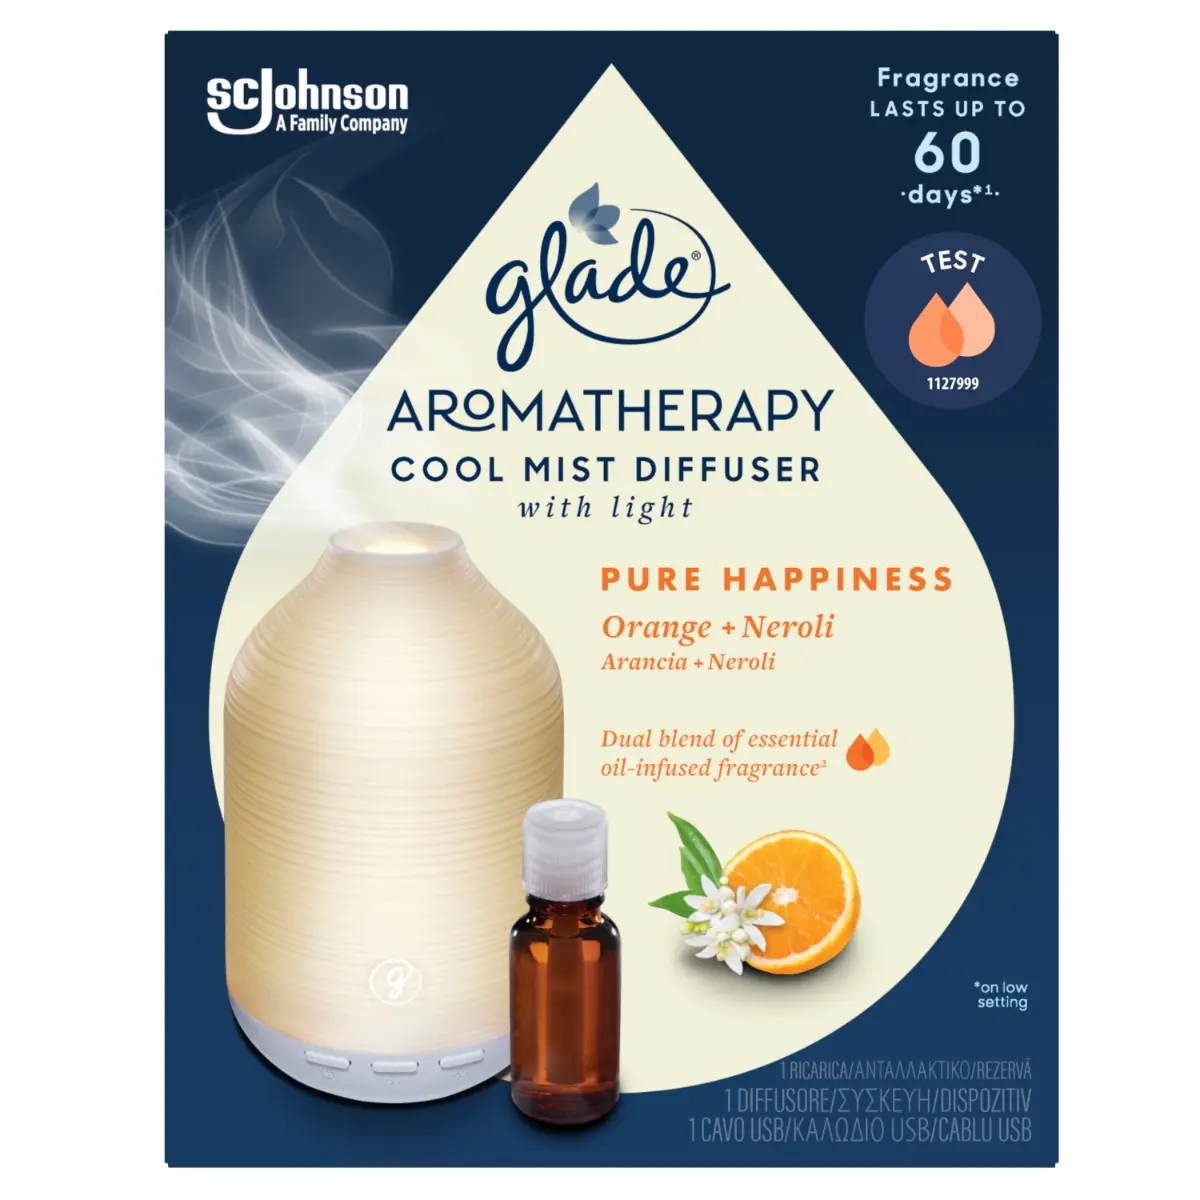 Glade Aromatherapy Cool Mist Diffuser - Pure Happiness - odorizant electric - aparat